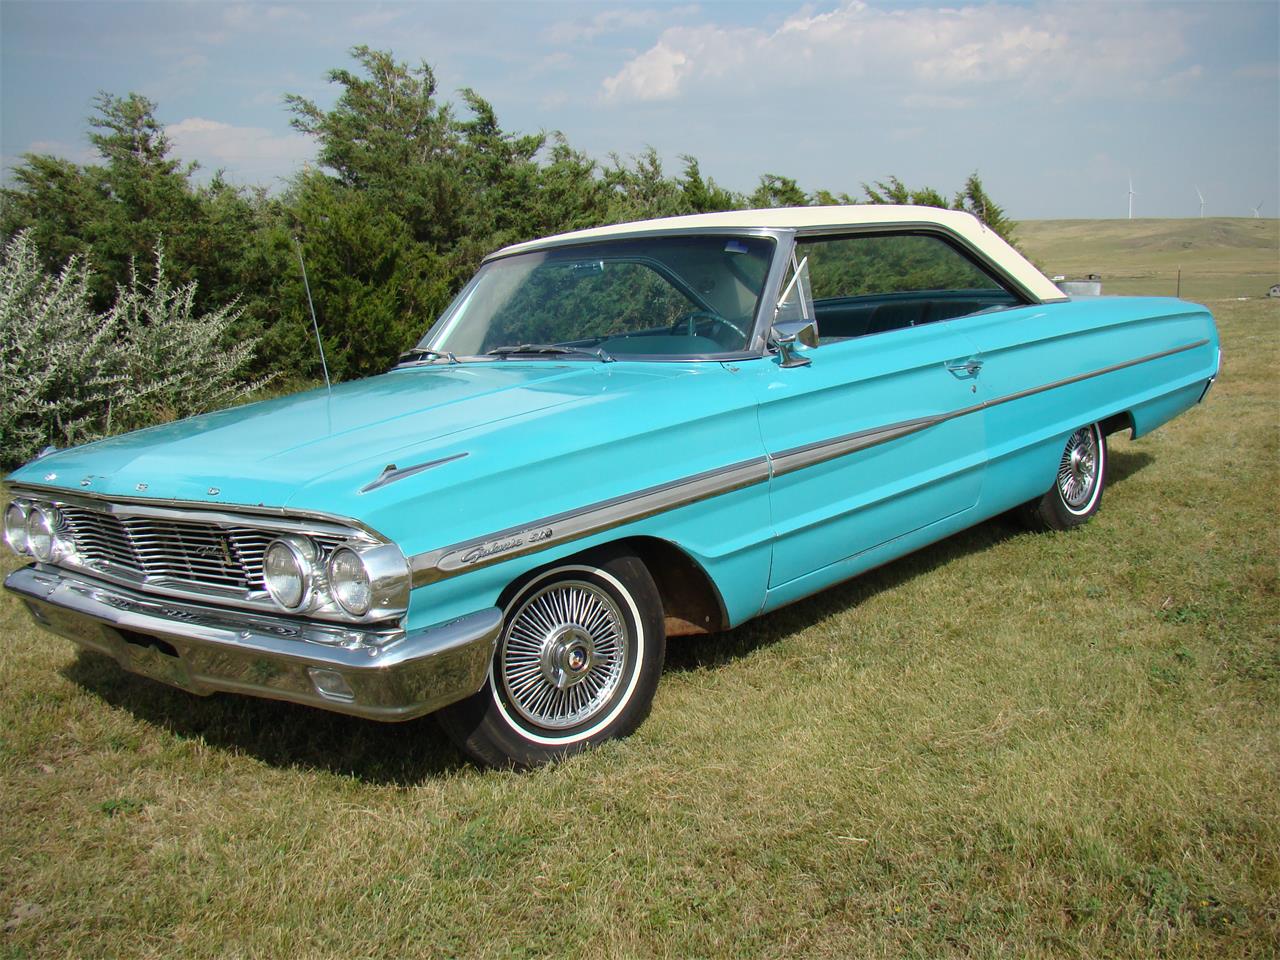 For Sale: 1964 Ford Galaxie 500 in Calhan, Colorado.